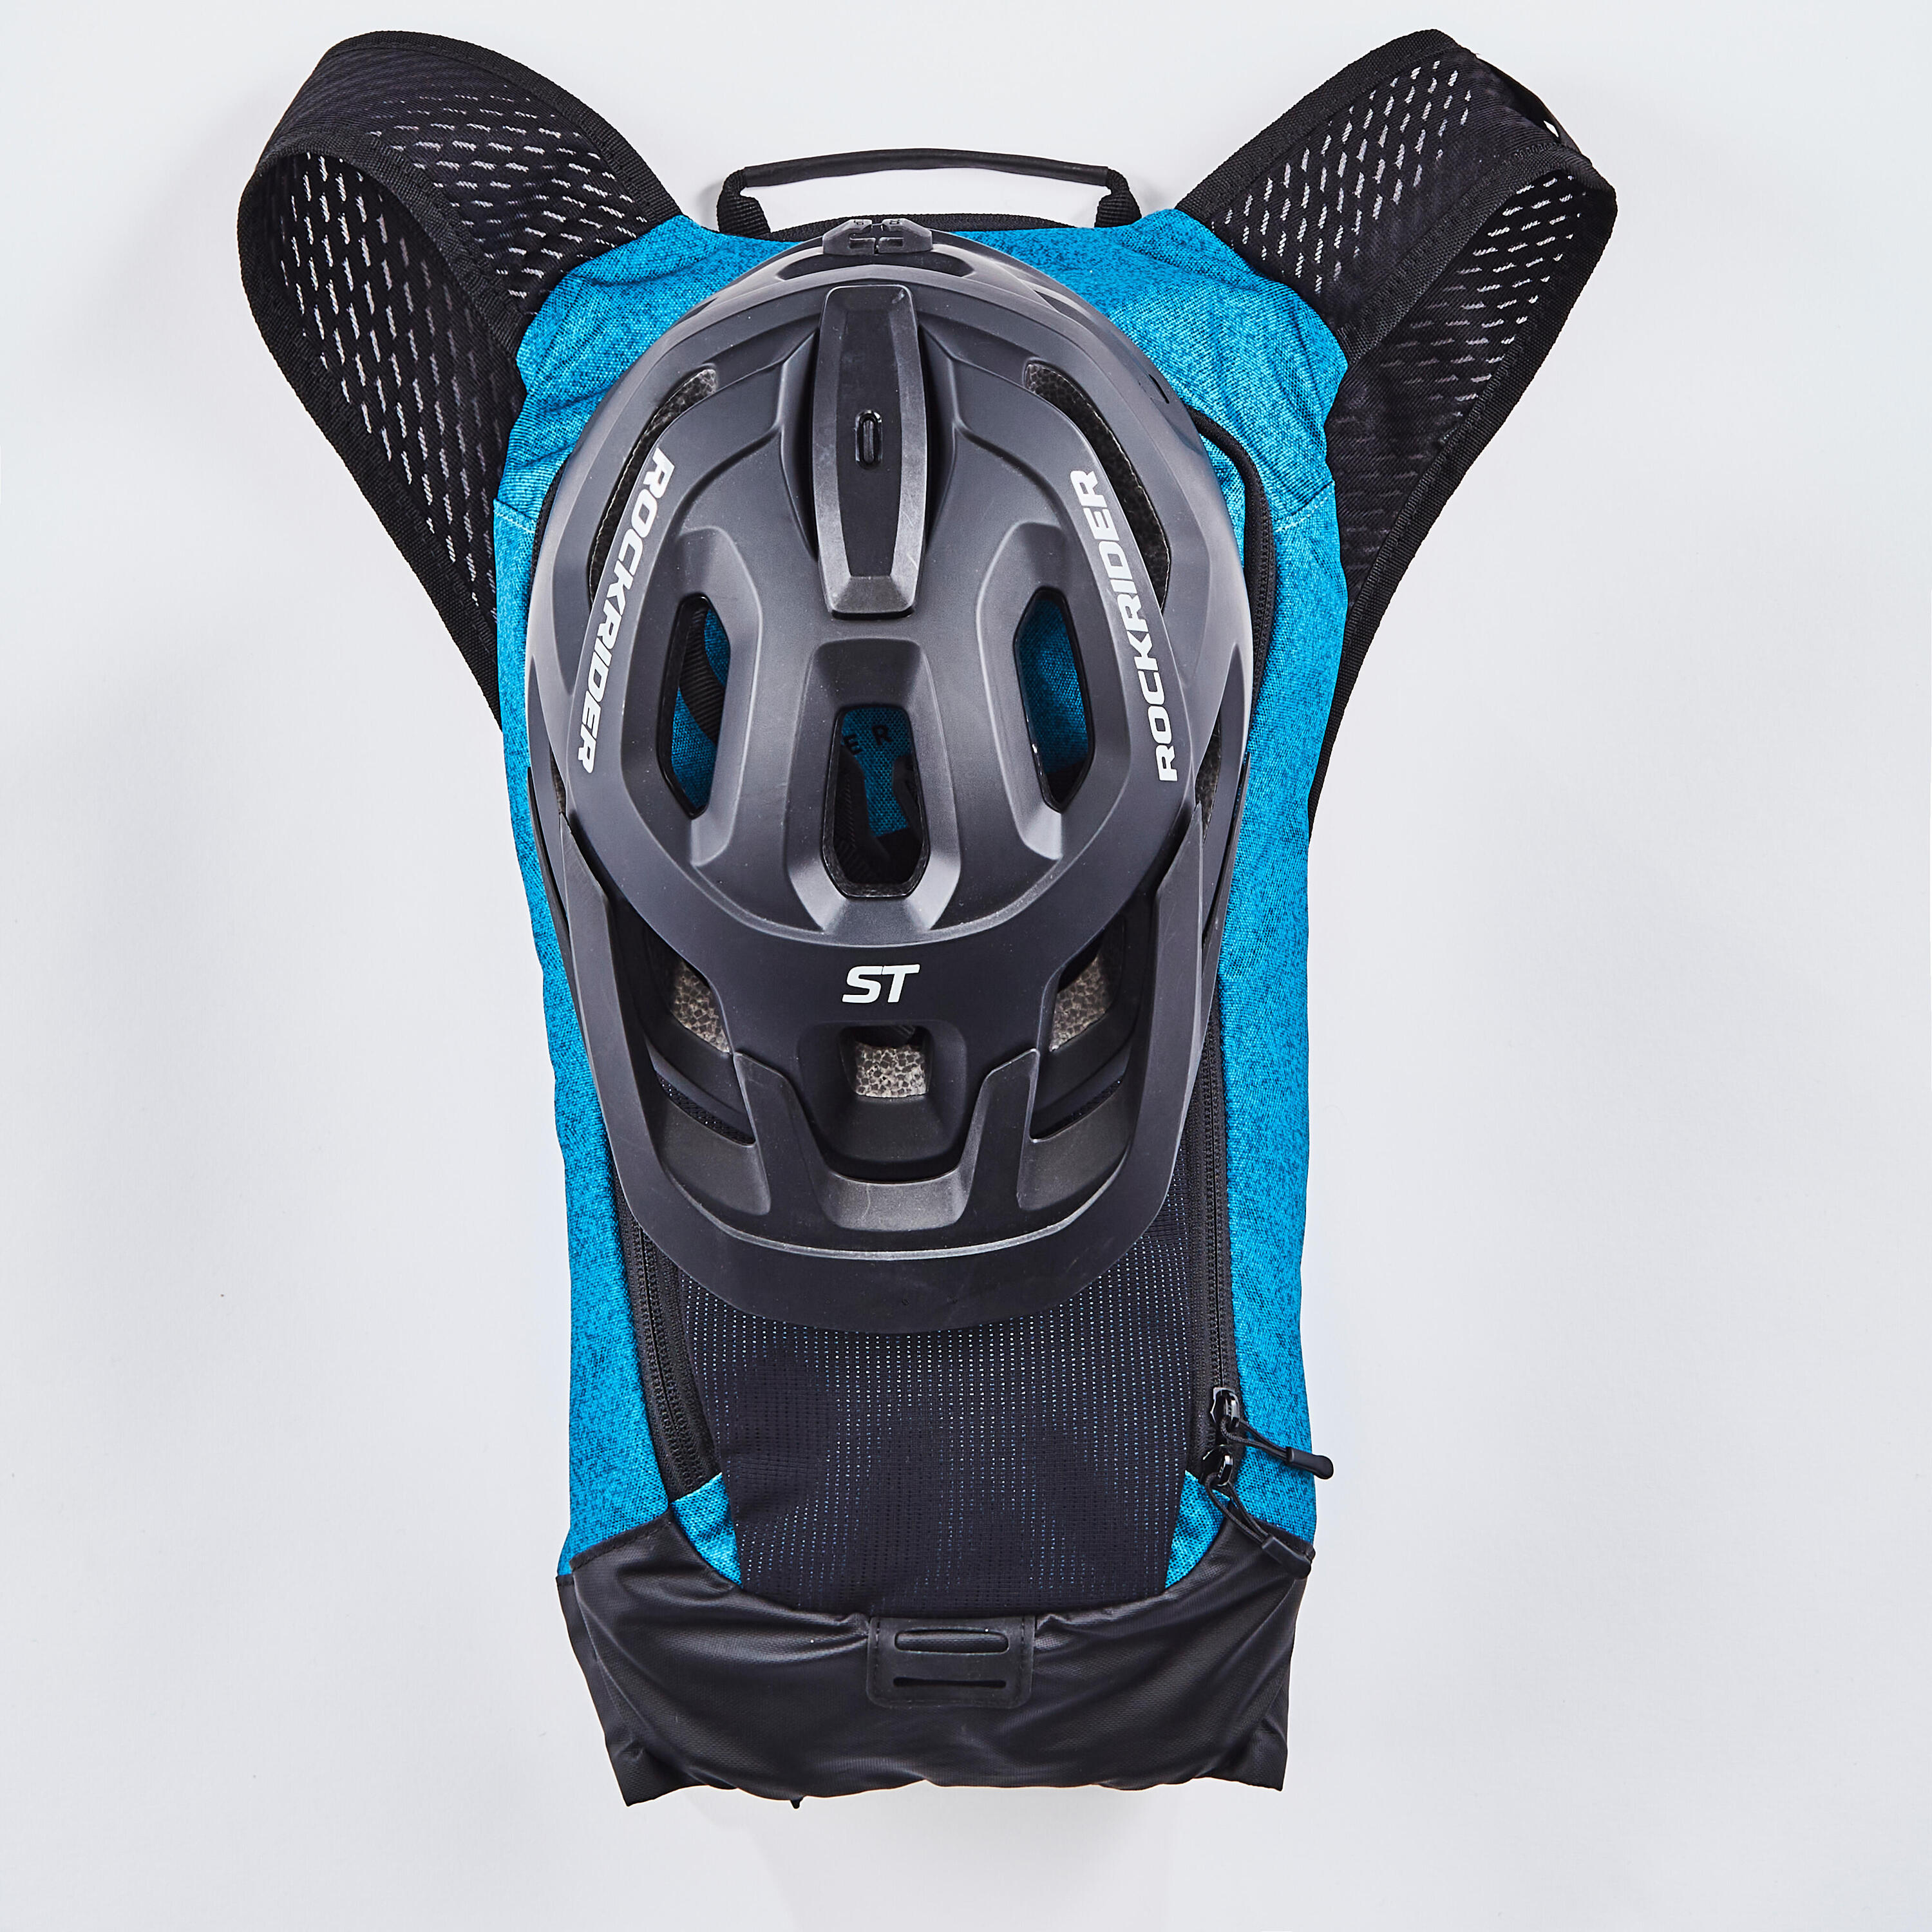 Mountain Bike Hydration Backpack Explore 7L/2L Water - Turquoise Blue 12/18